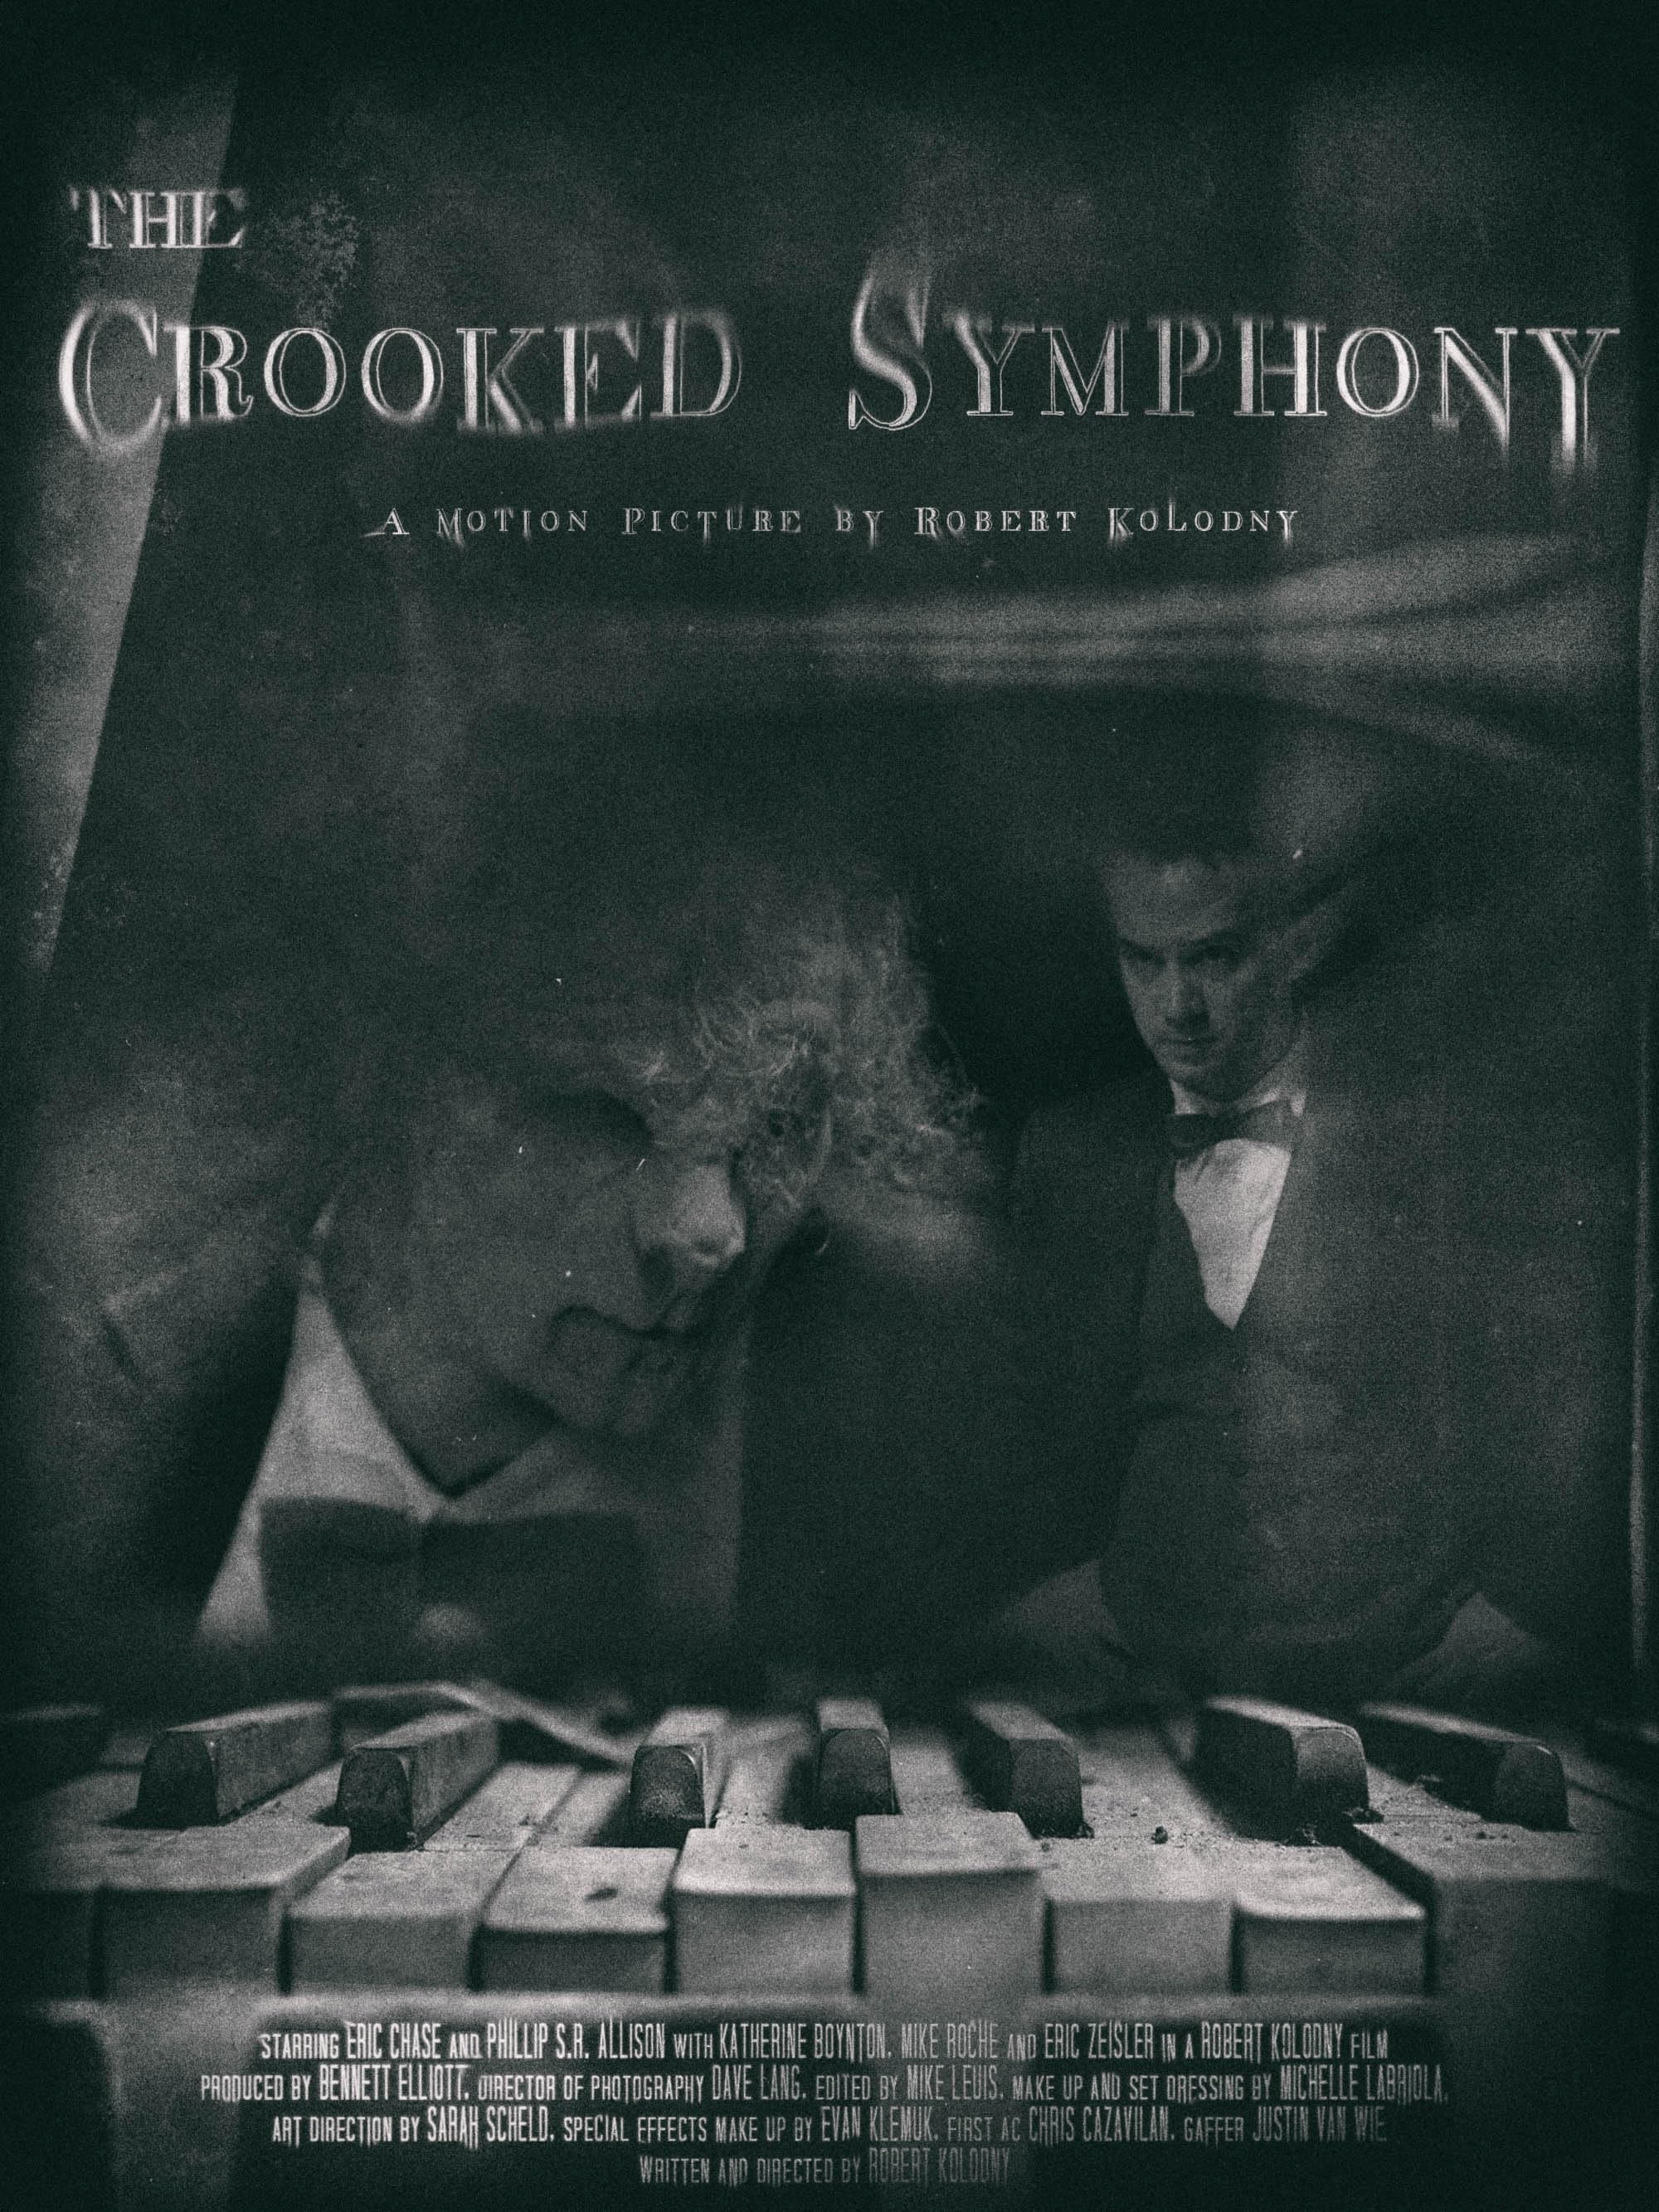 The Crooked Symphony